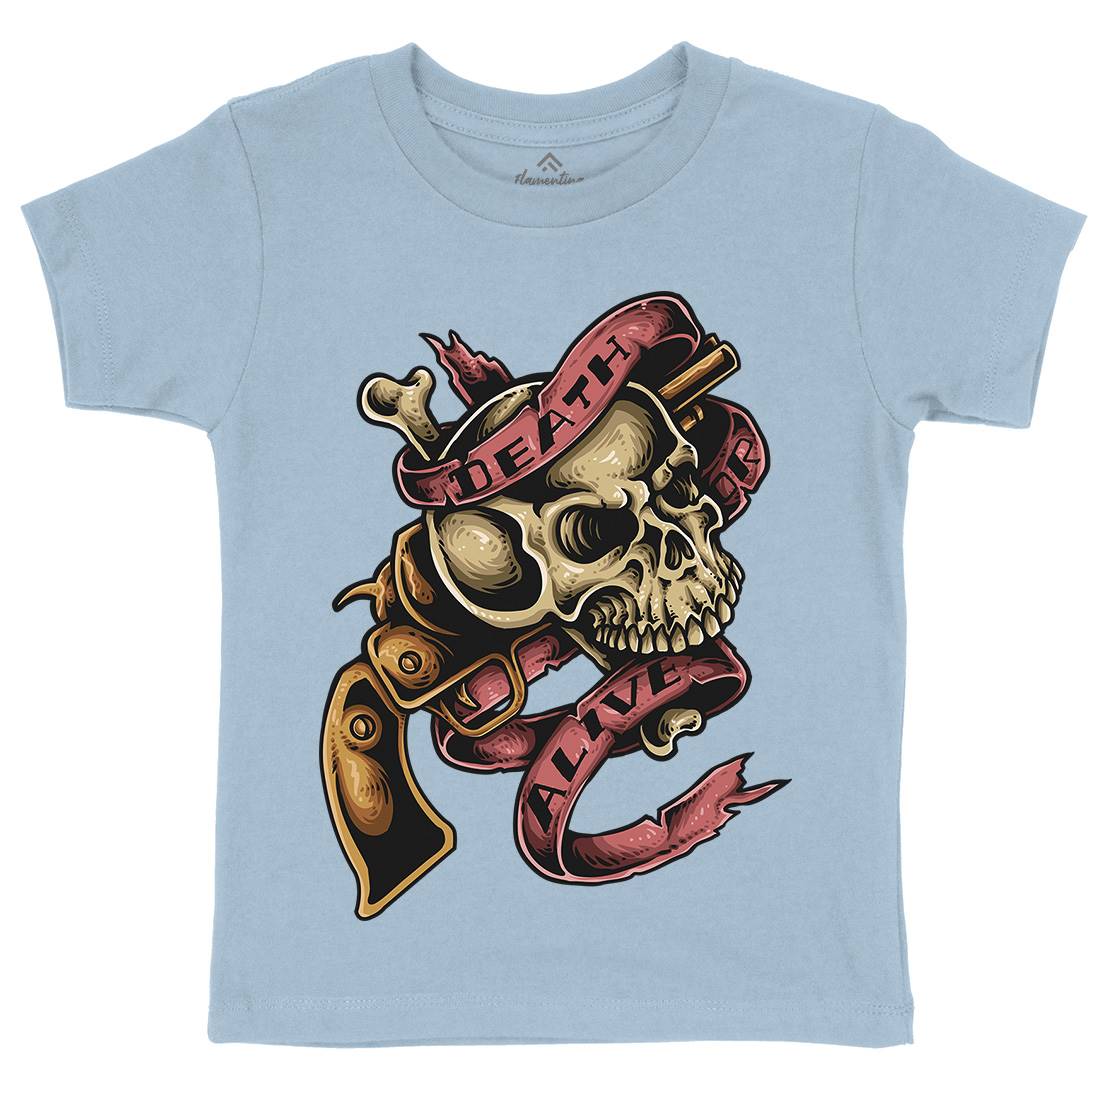 Death Or Alive Kids Organic Crew Neck T-Shirt Navy A416